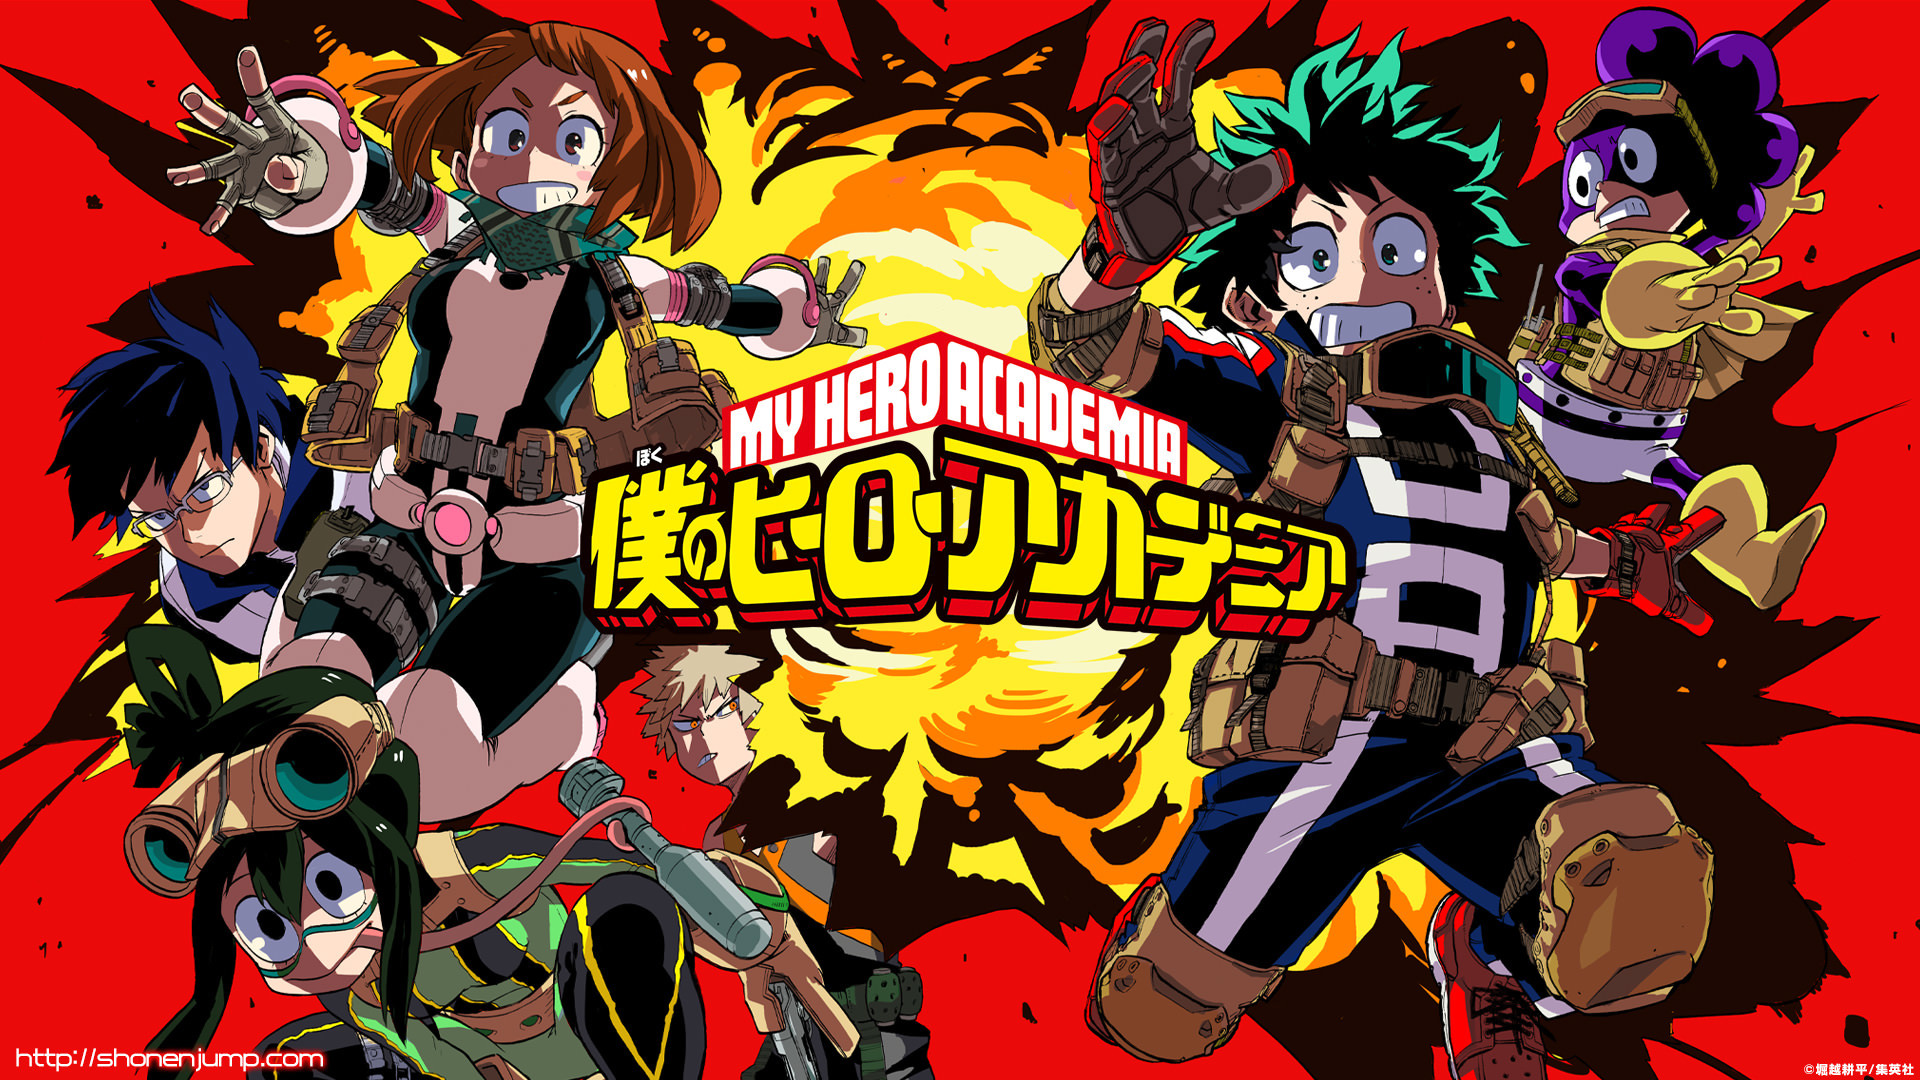 1920x1080 #boku_no_hero_academia As the spring season starts I give you a bunch of  Boku no Hero Academia wallpapers. (Along with quite a few other ones.)  Enjoy!